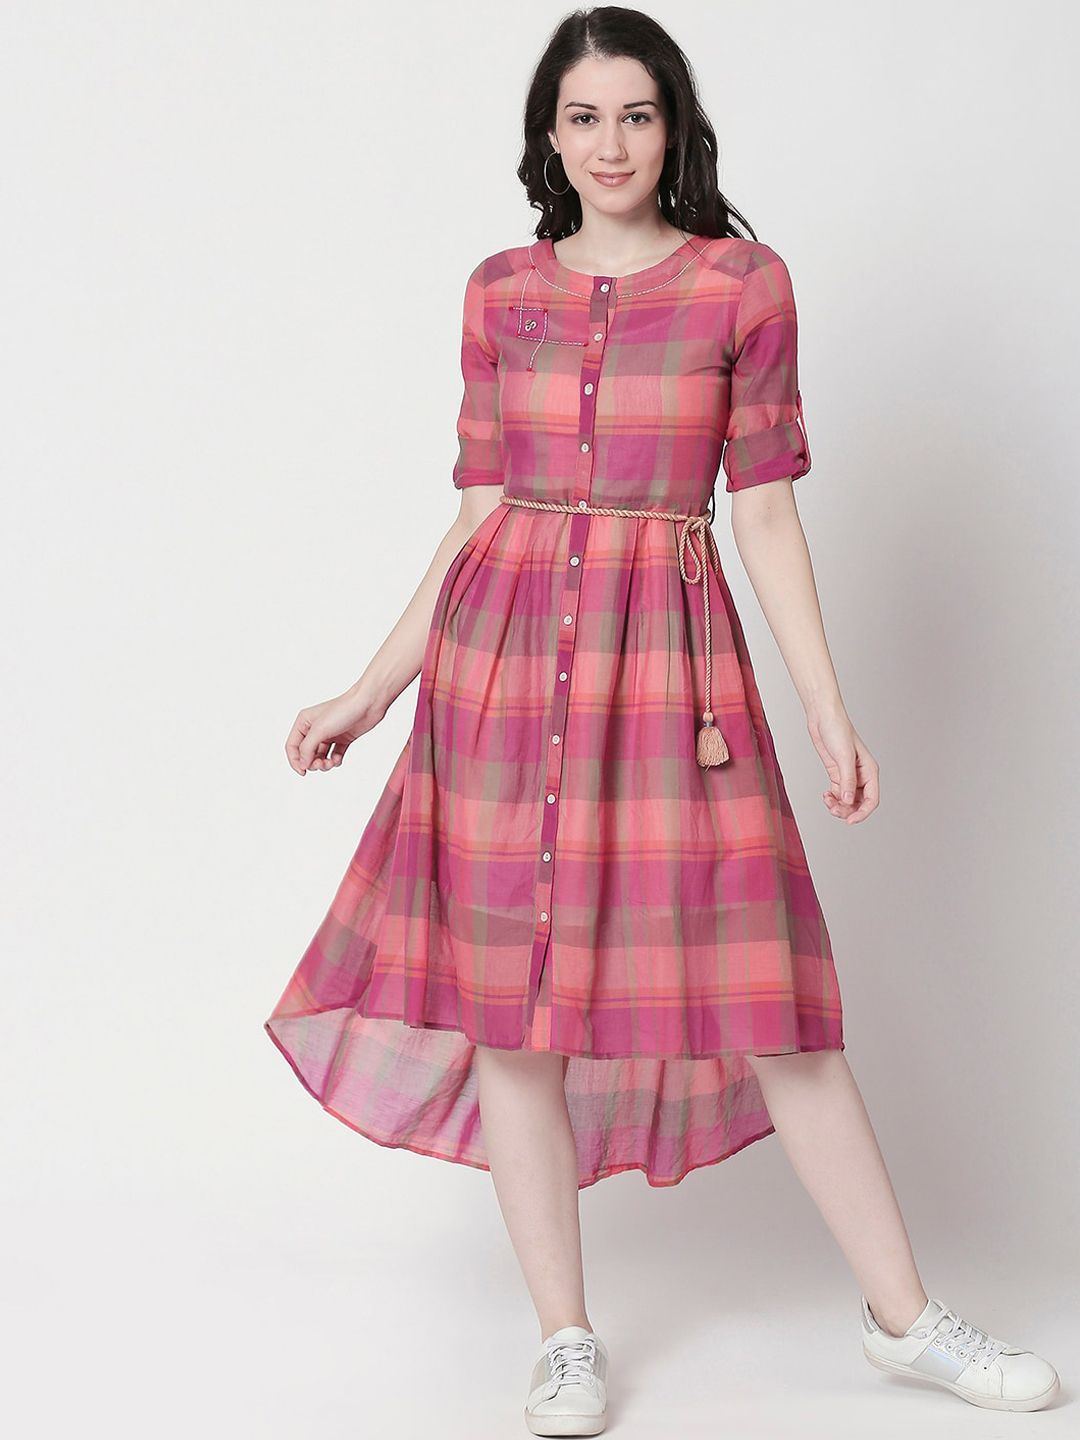 TERQUOIS Pink Checked Pure Cotton Fit and Flare Dress Price in India